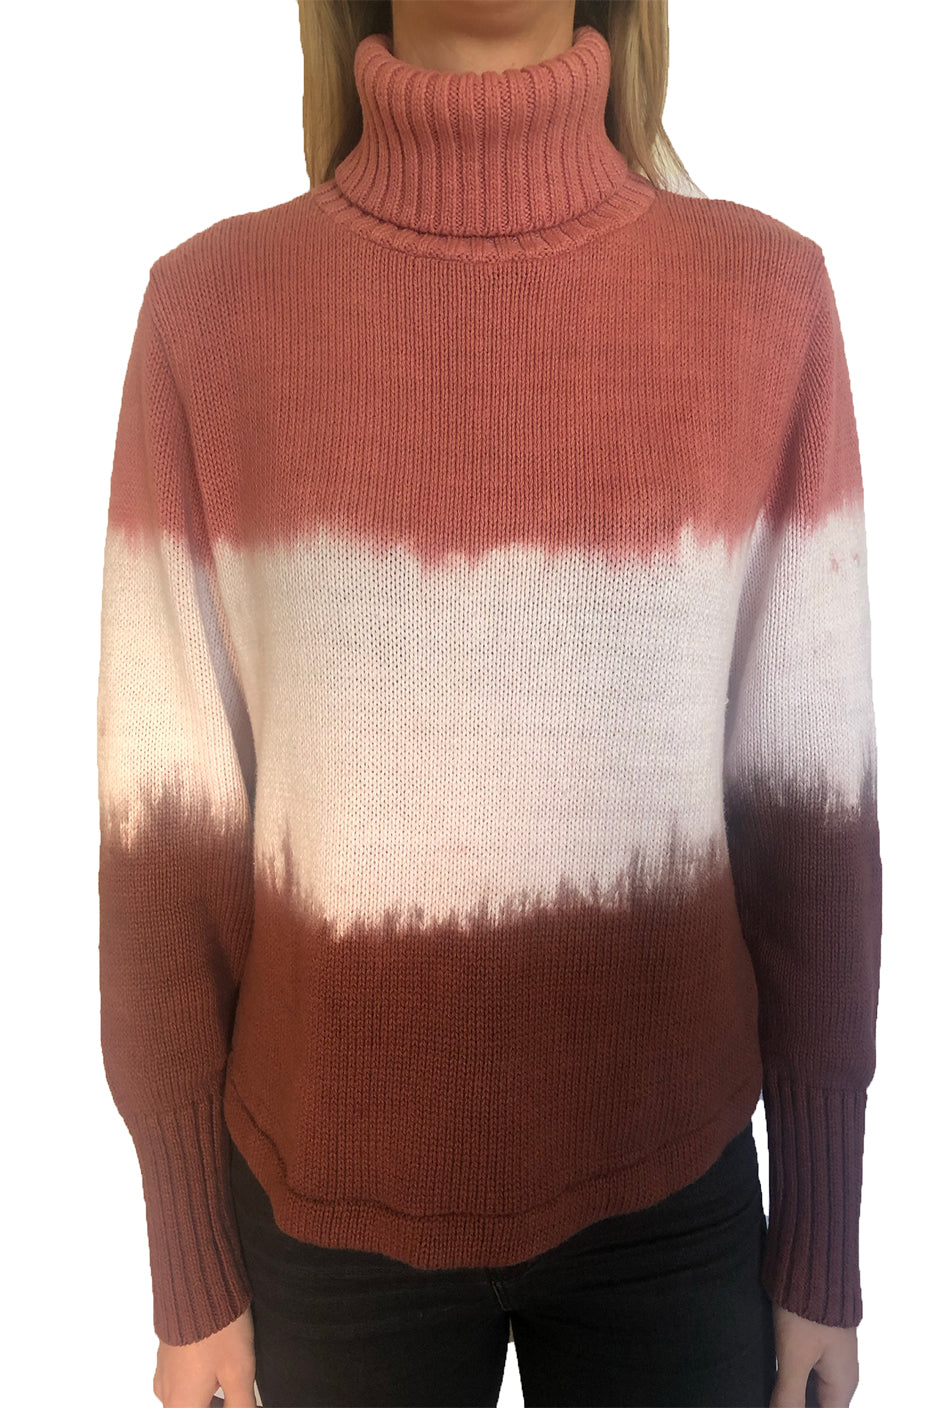 Tricolor Knit High Neck Pullover - Women - Ready-to-Wear